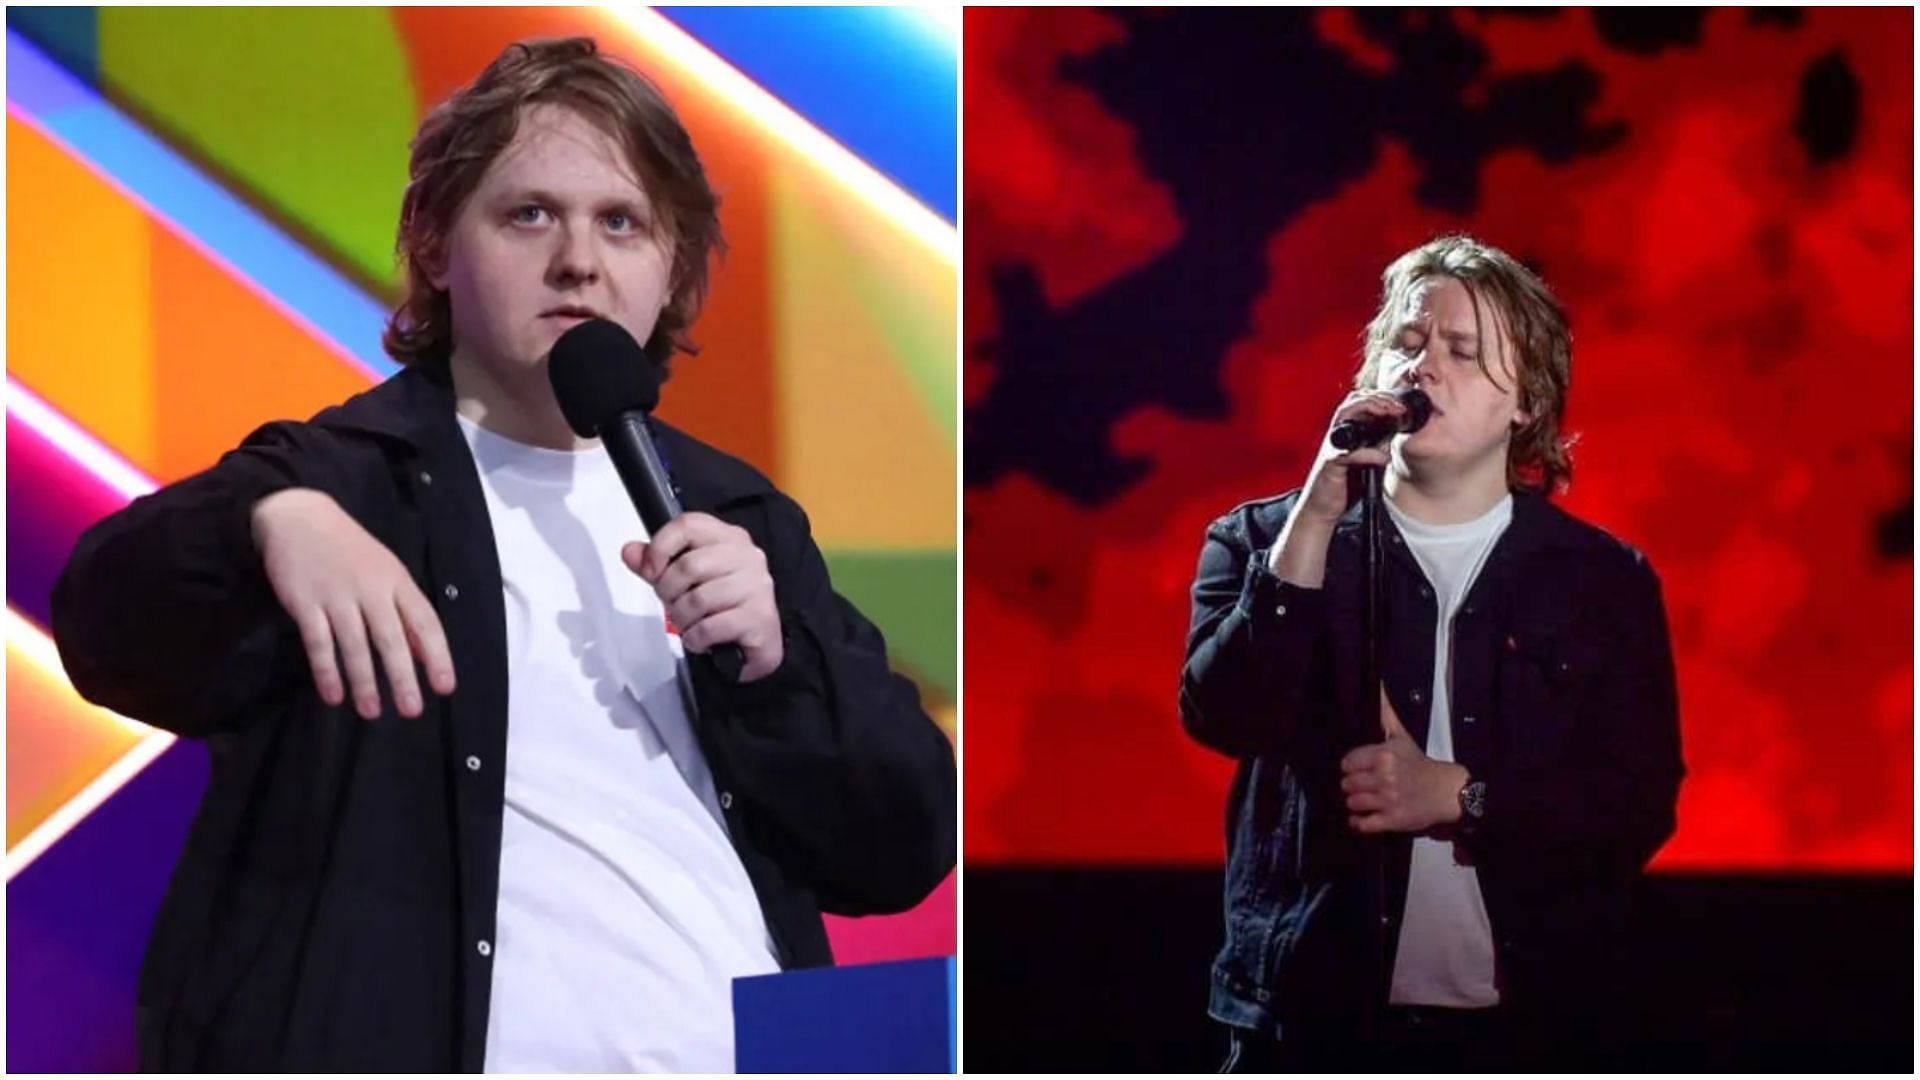 Lewis Capaldi has announced new tour dates for 2023. (Image via Getty)